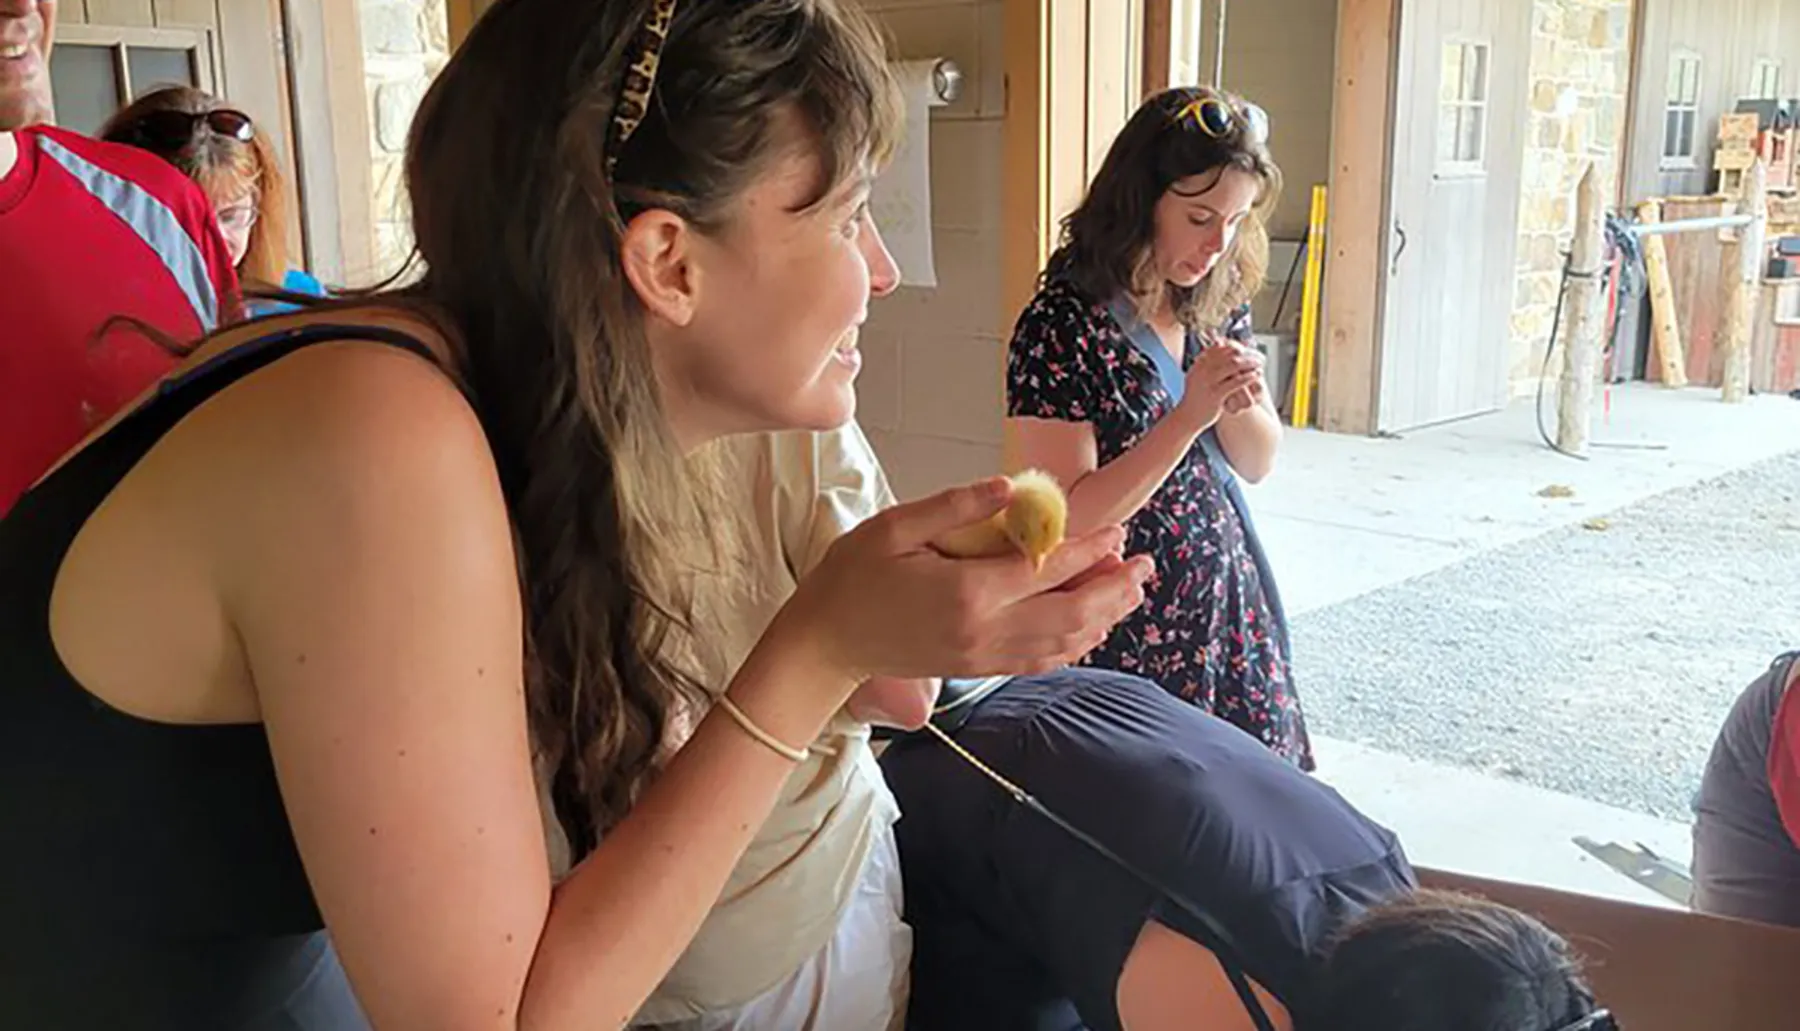 A woman is smiling and holding a small chick in her hands while another person is focused on her phone in the background, all in a rustic setting that appears to be a barn or farm.